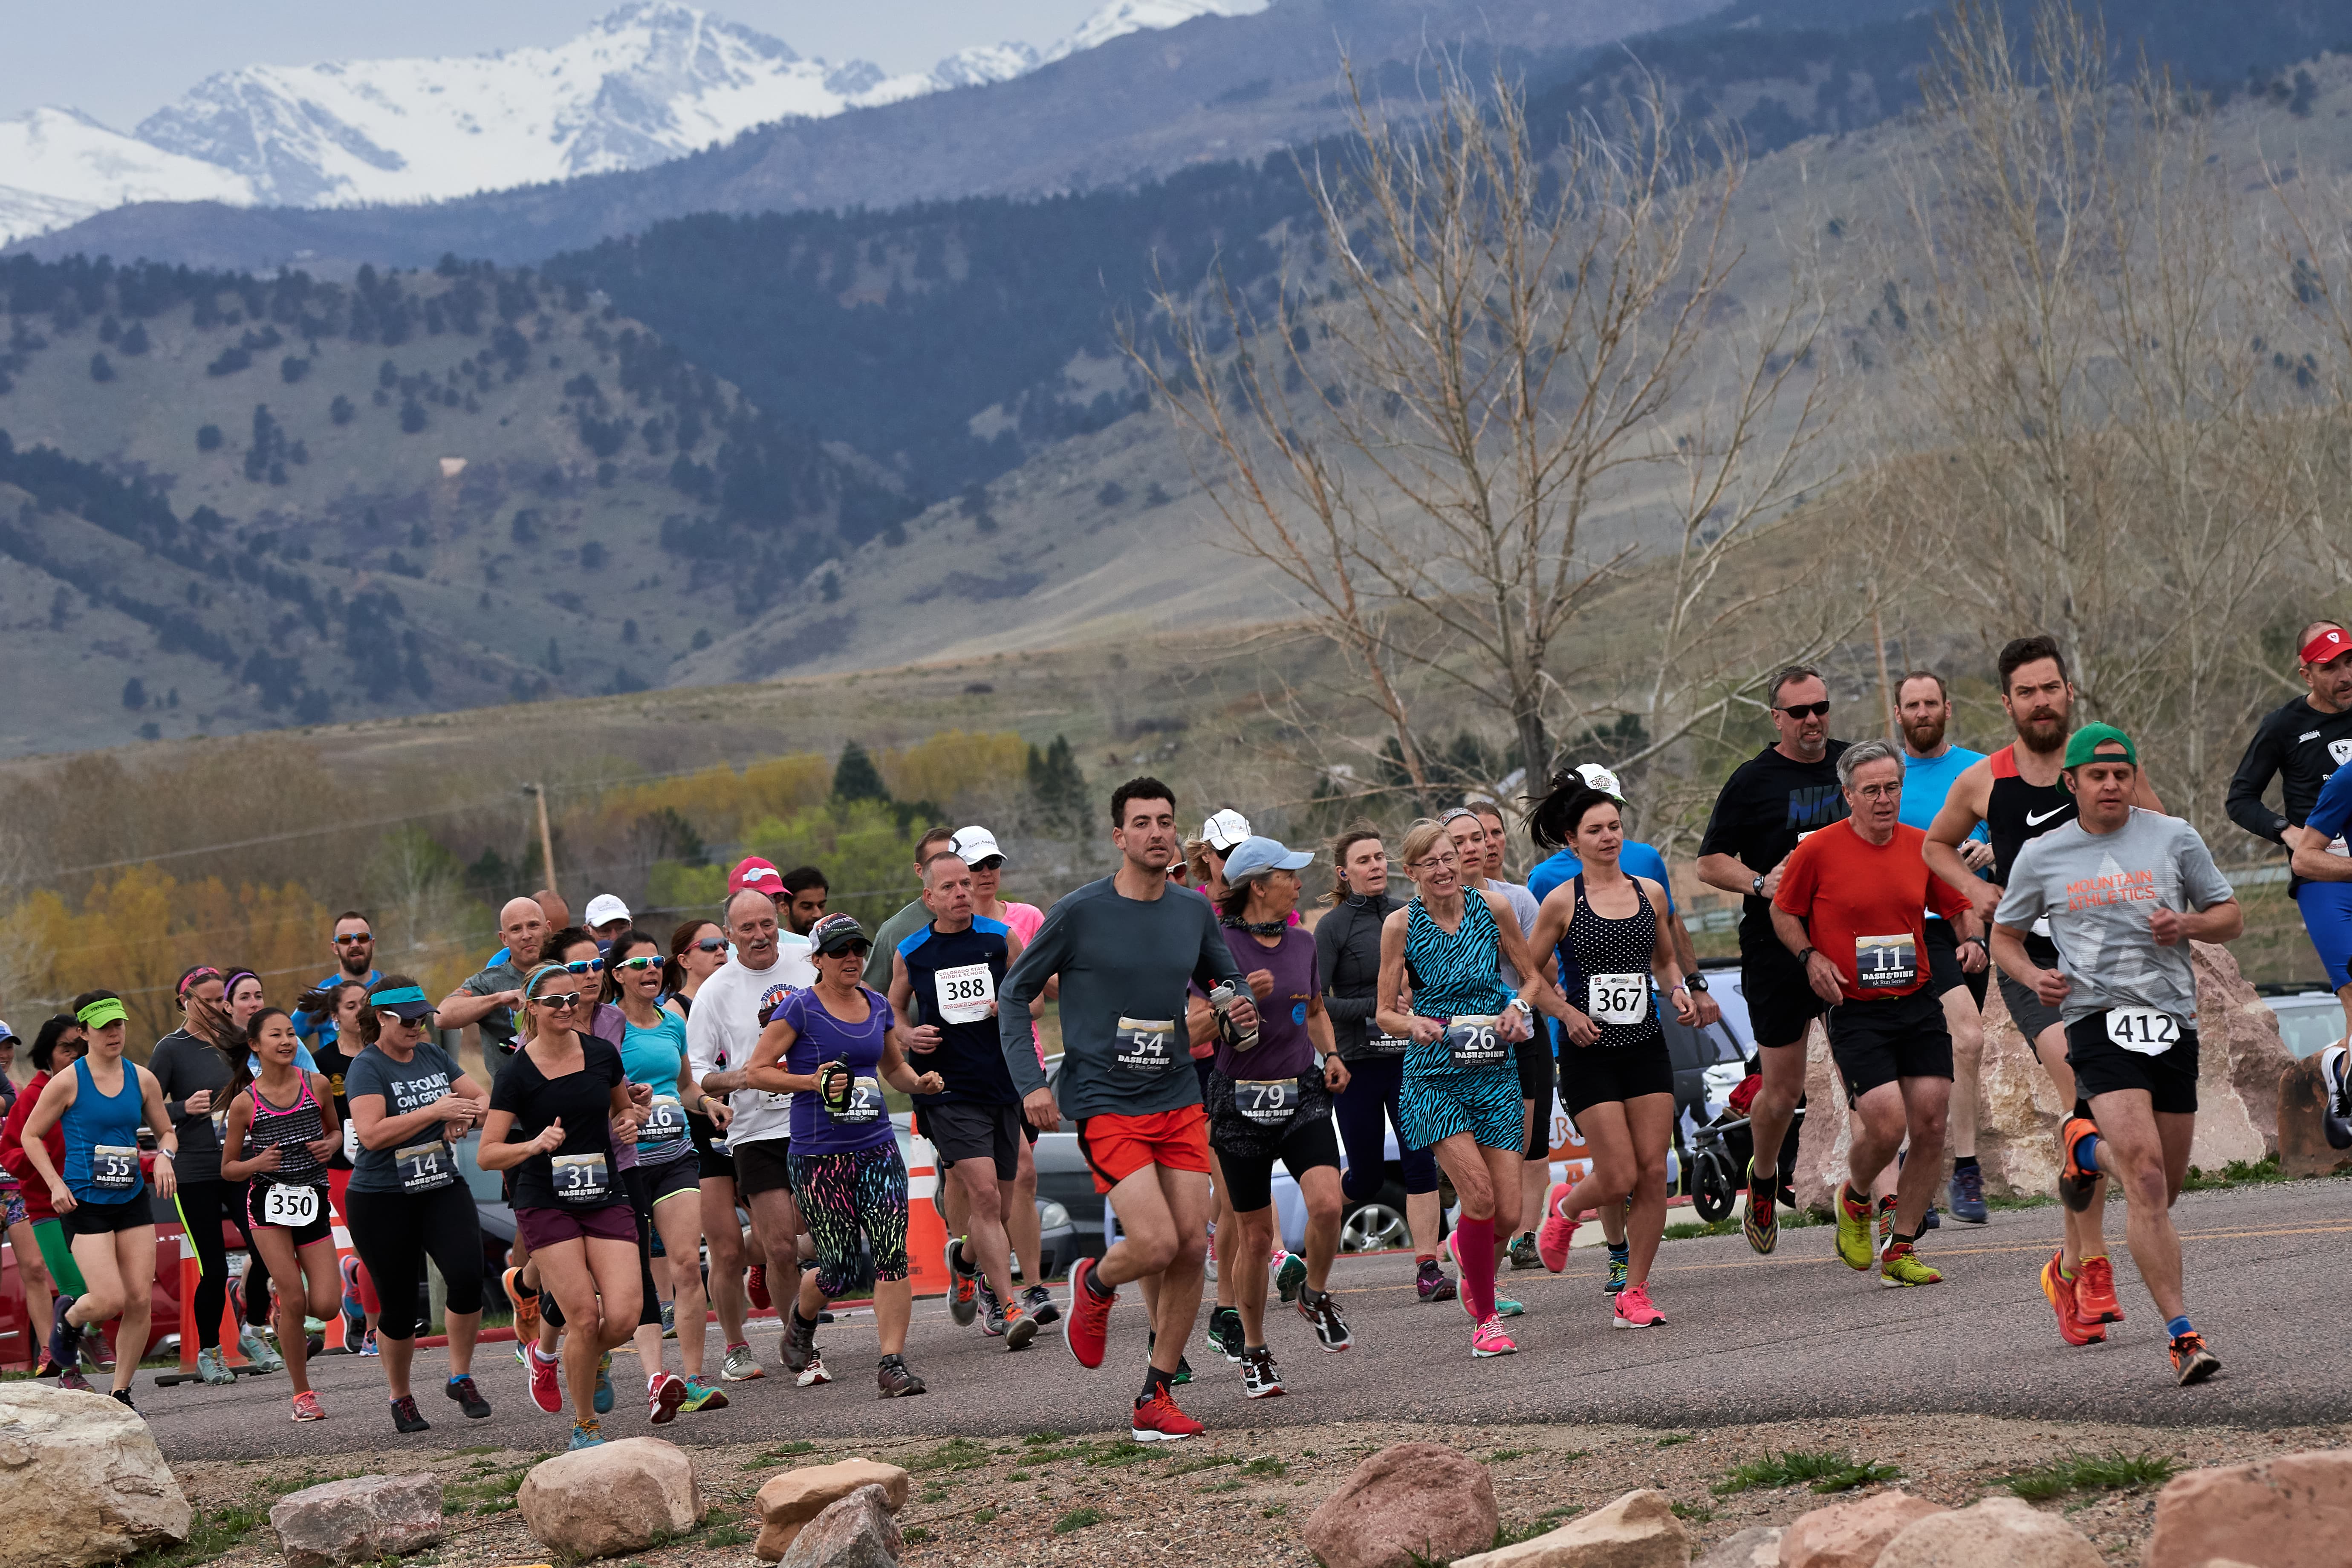 Tempo Runs can help improve all of your racing from the mile to the marathon. Dash & Dine 5k race